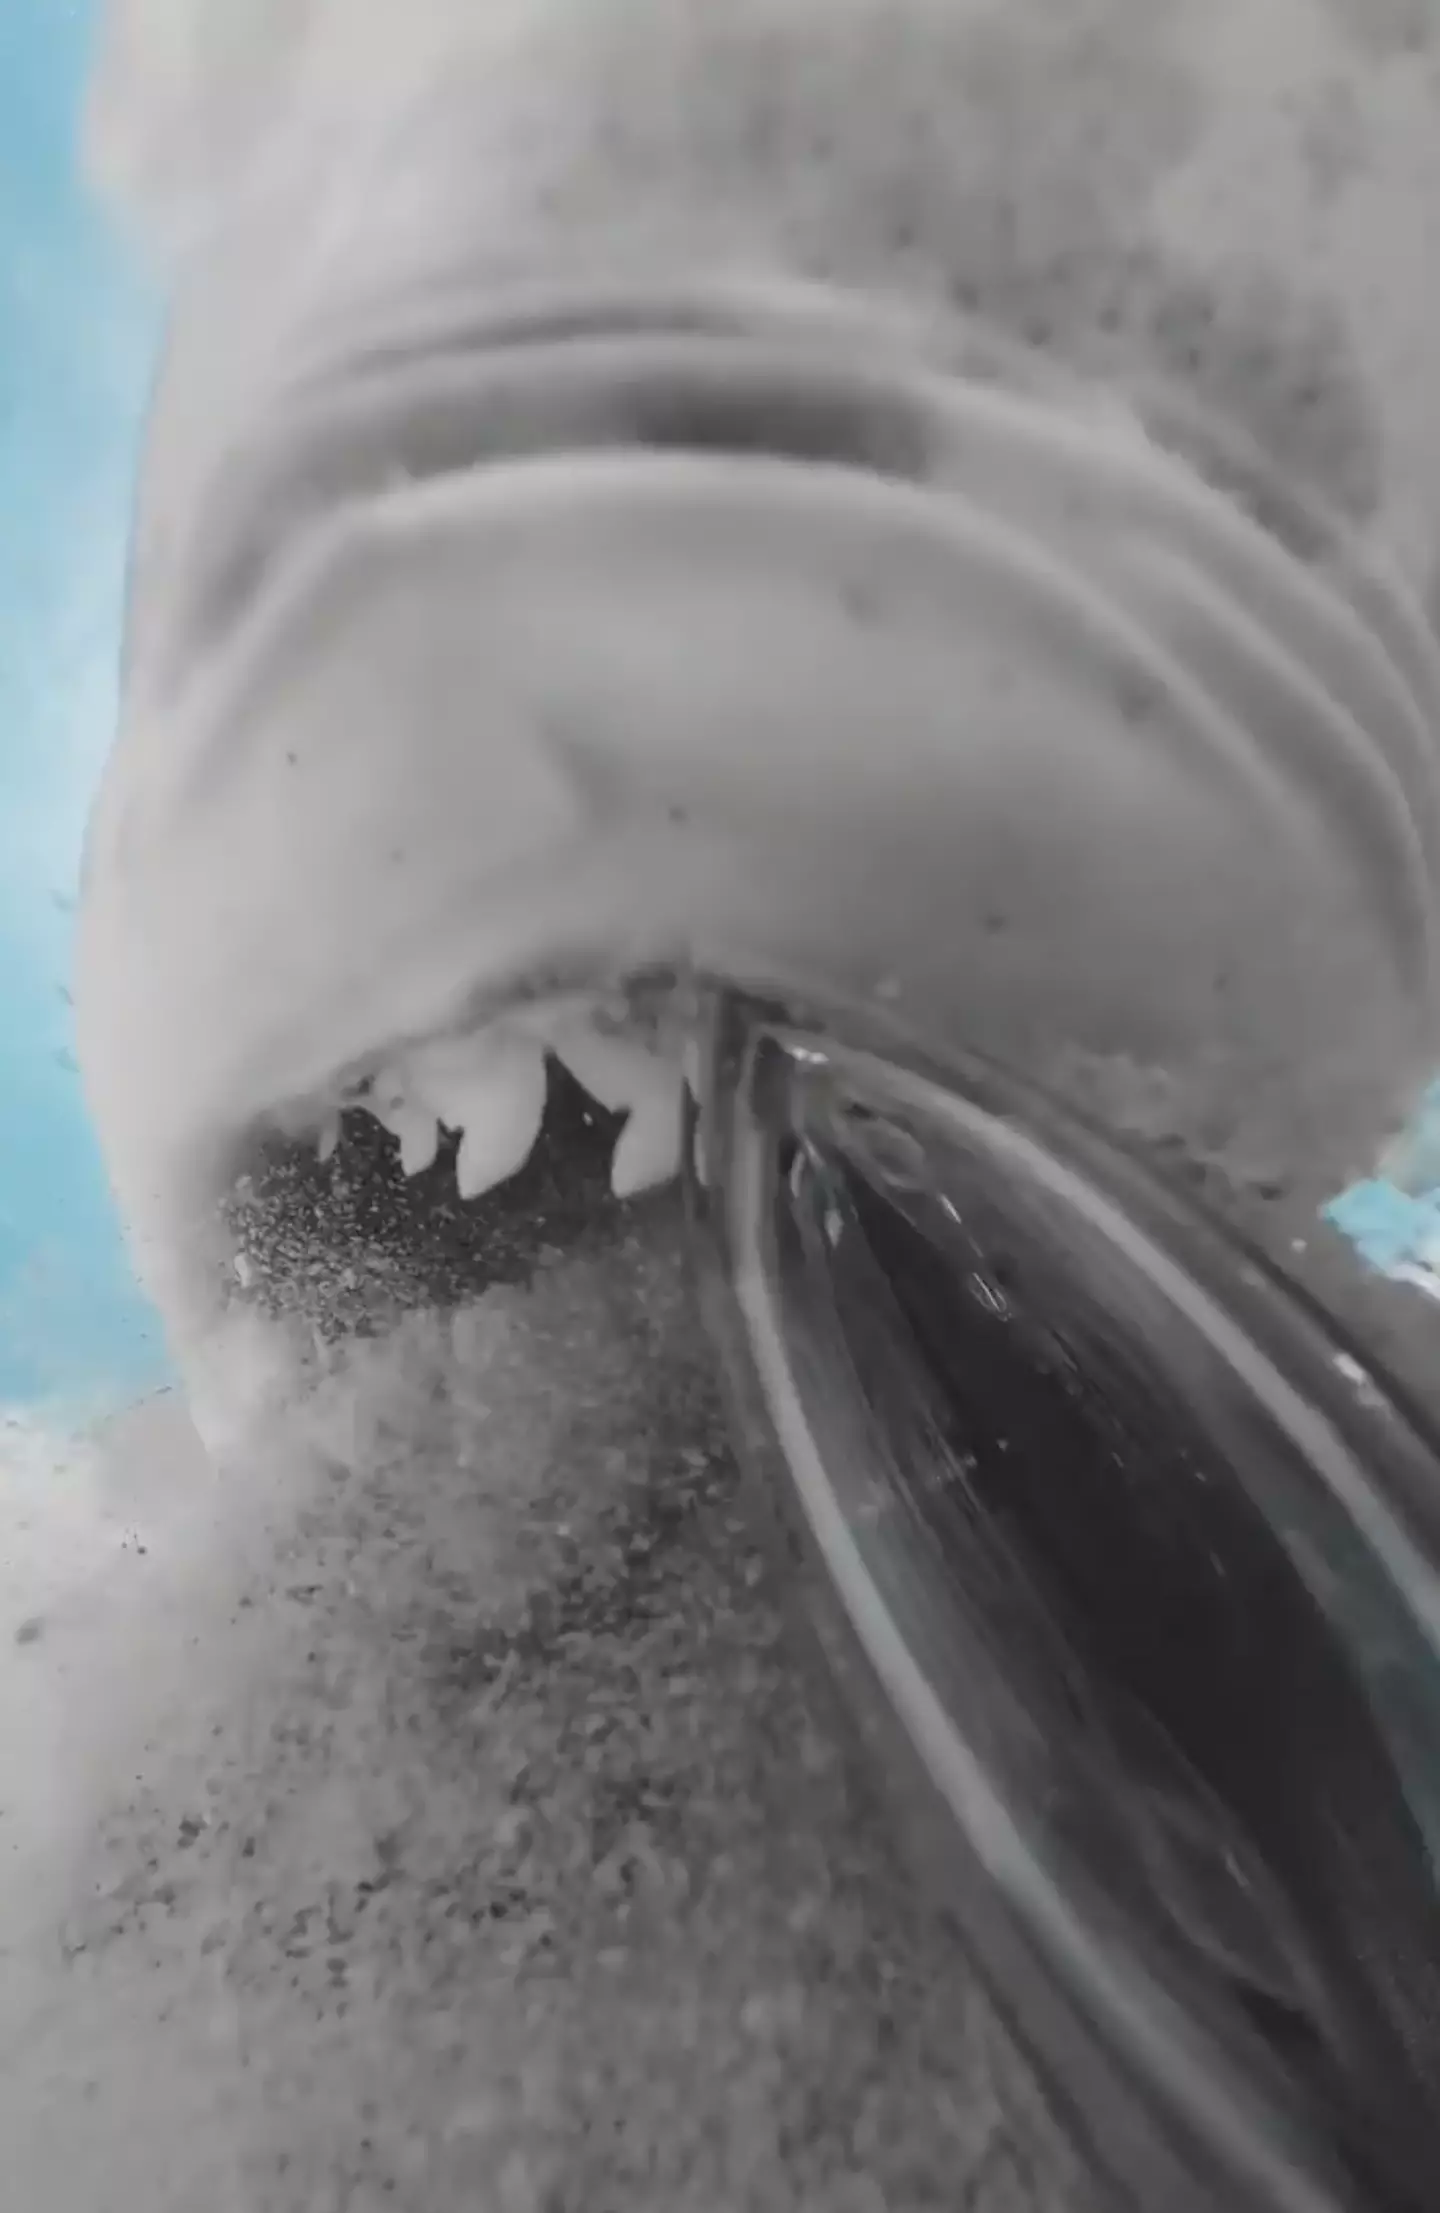 Incredible footage shows inside the shark's mouth.